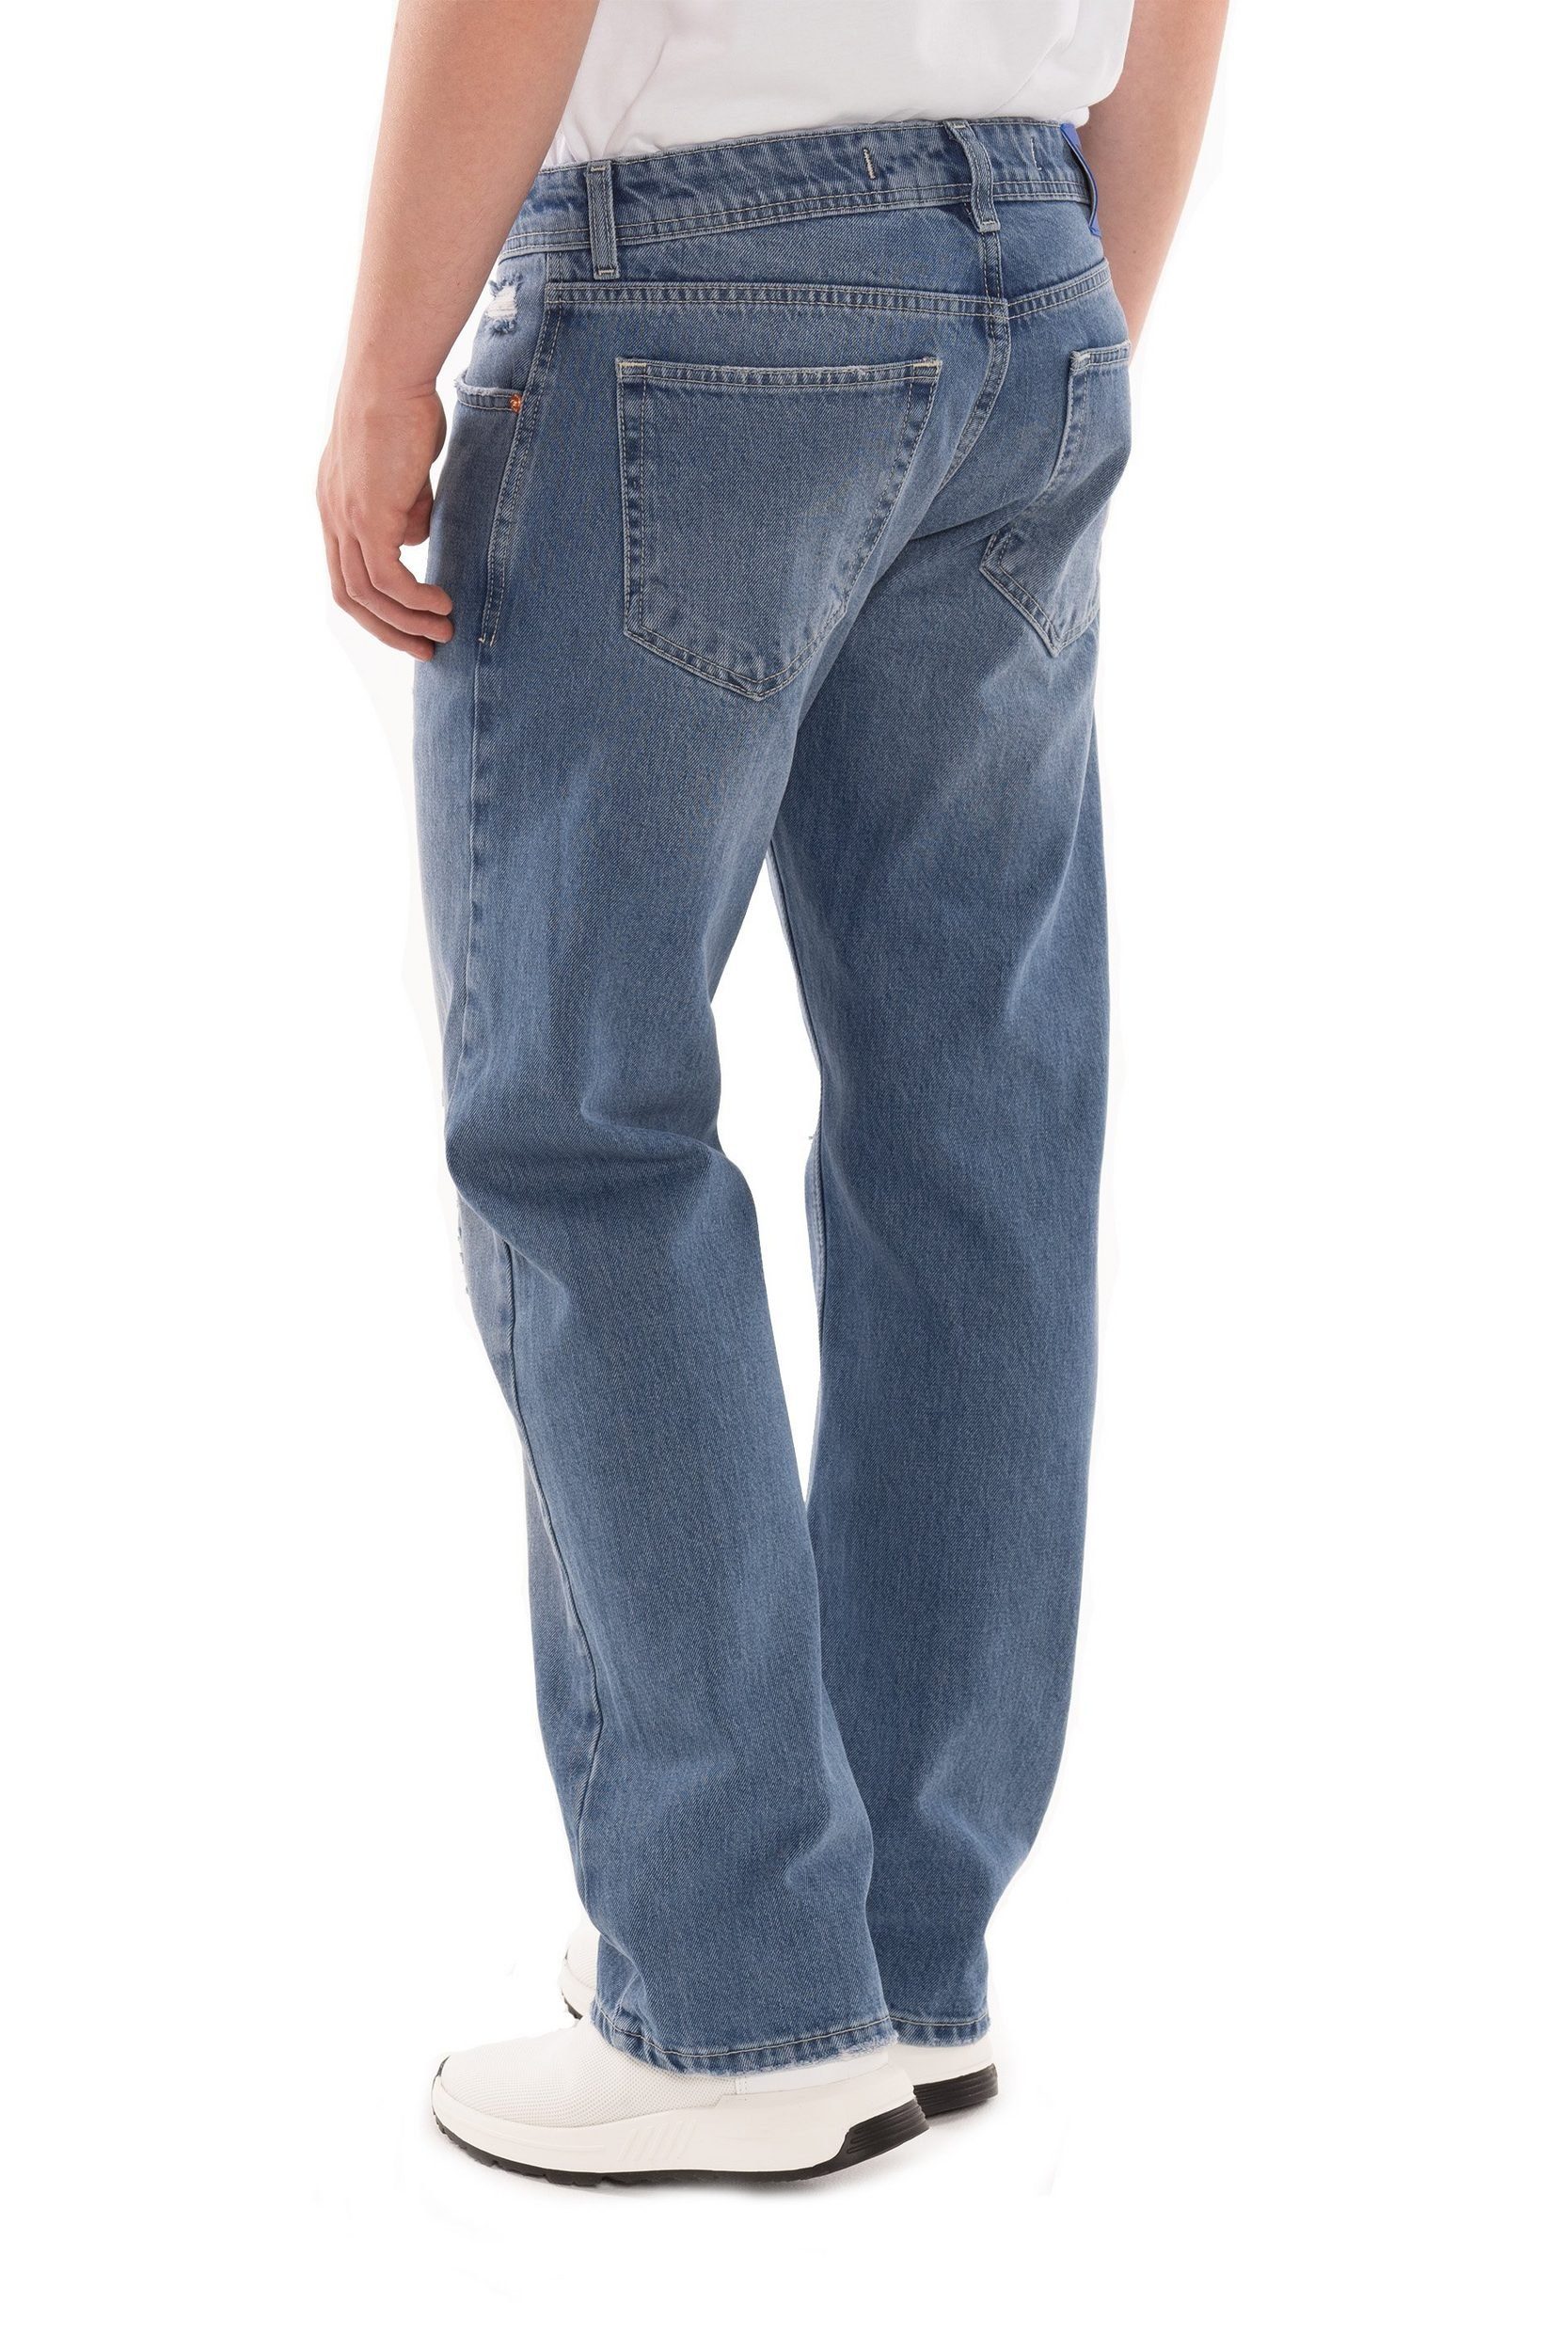 PICALDI Jeans Straight-Jeans 965 IOLA 5-Pocket-Style